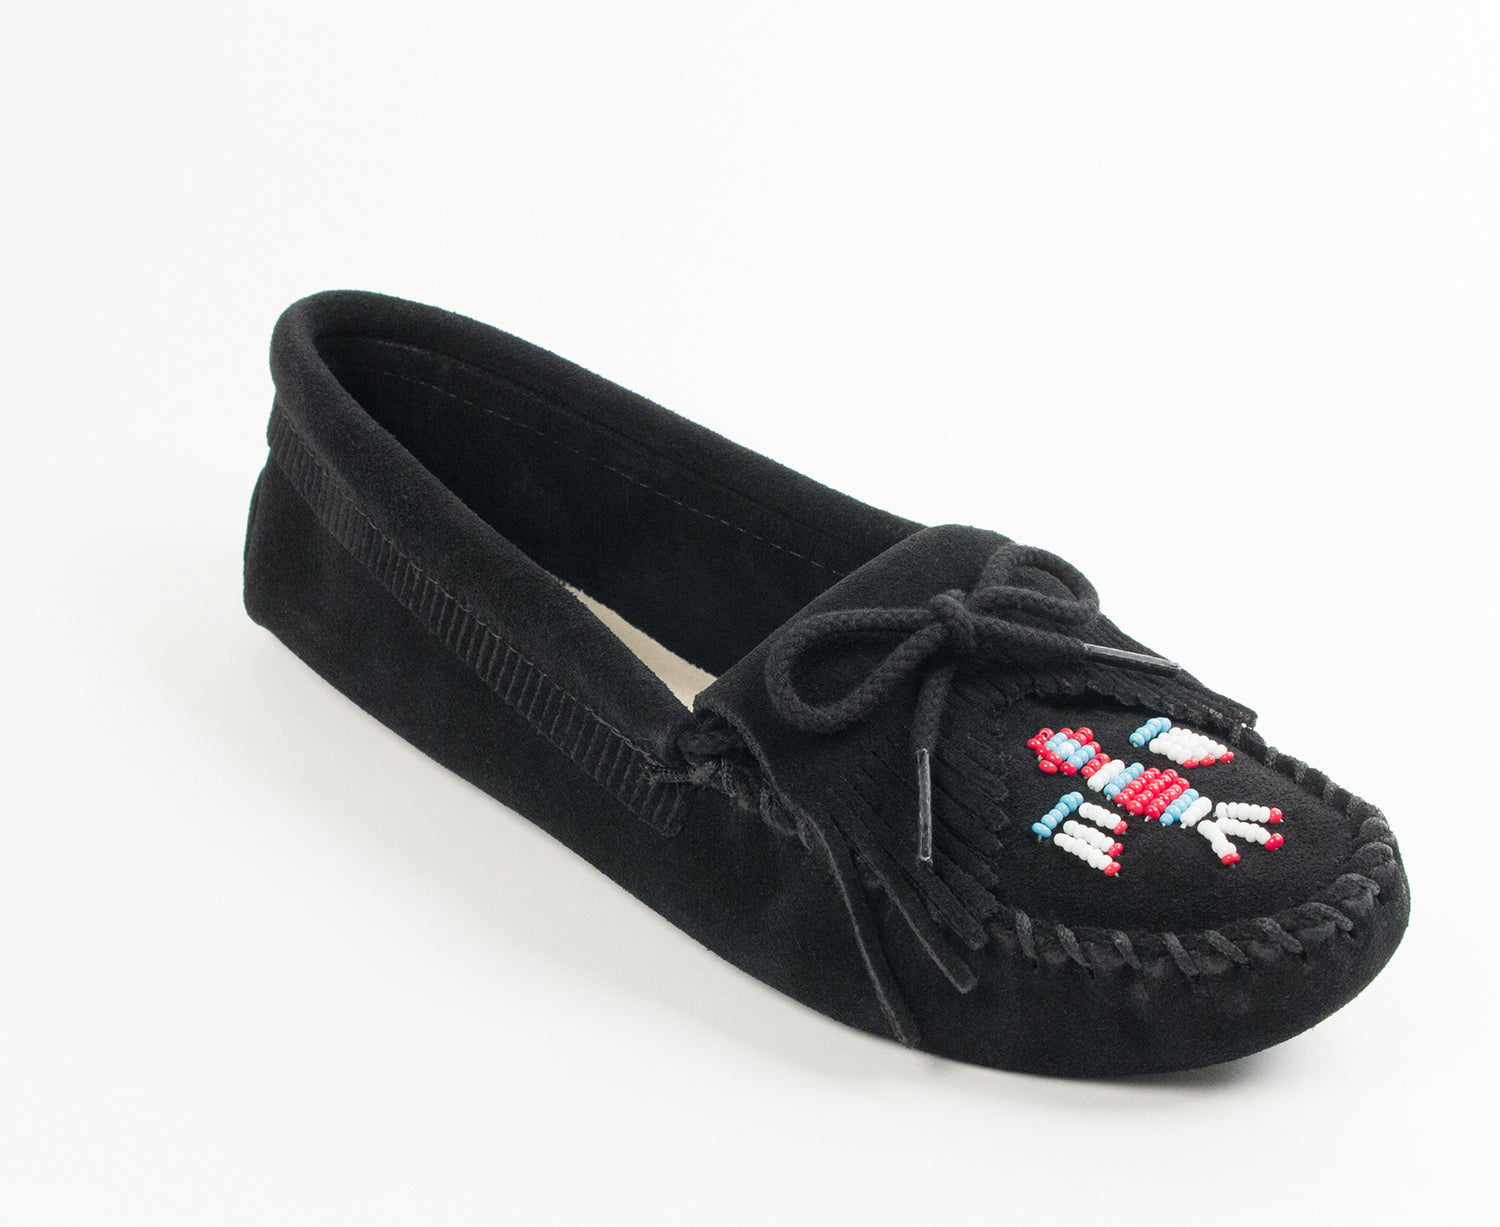 Thunderbird Softsole Moccasin in Black from 3/4 Angle View